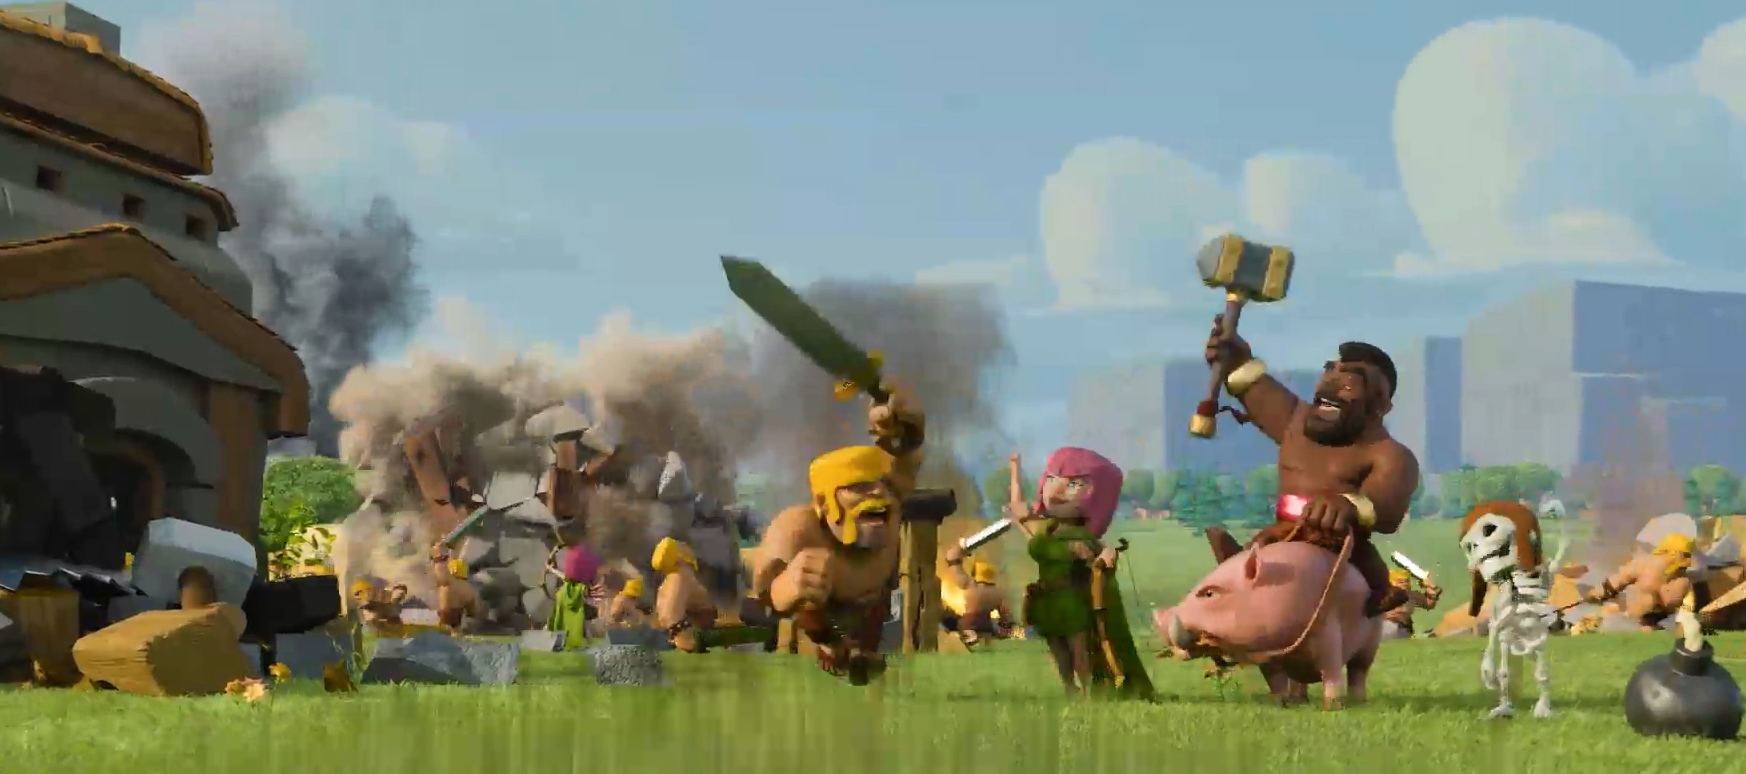 MEDIA ITALIA WINS THE SUPERCELL PITCH AND LAUNCHES CLASH OF CLANS